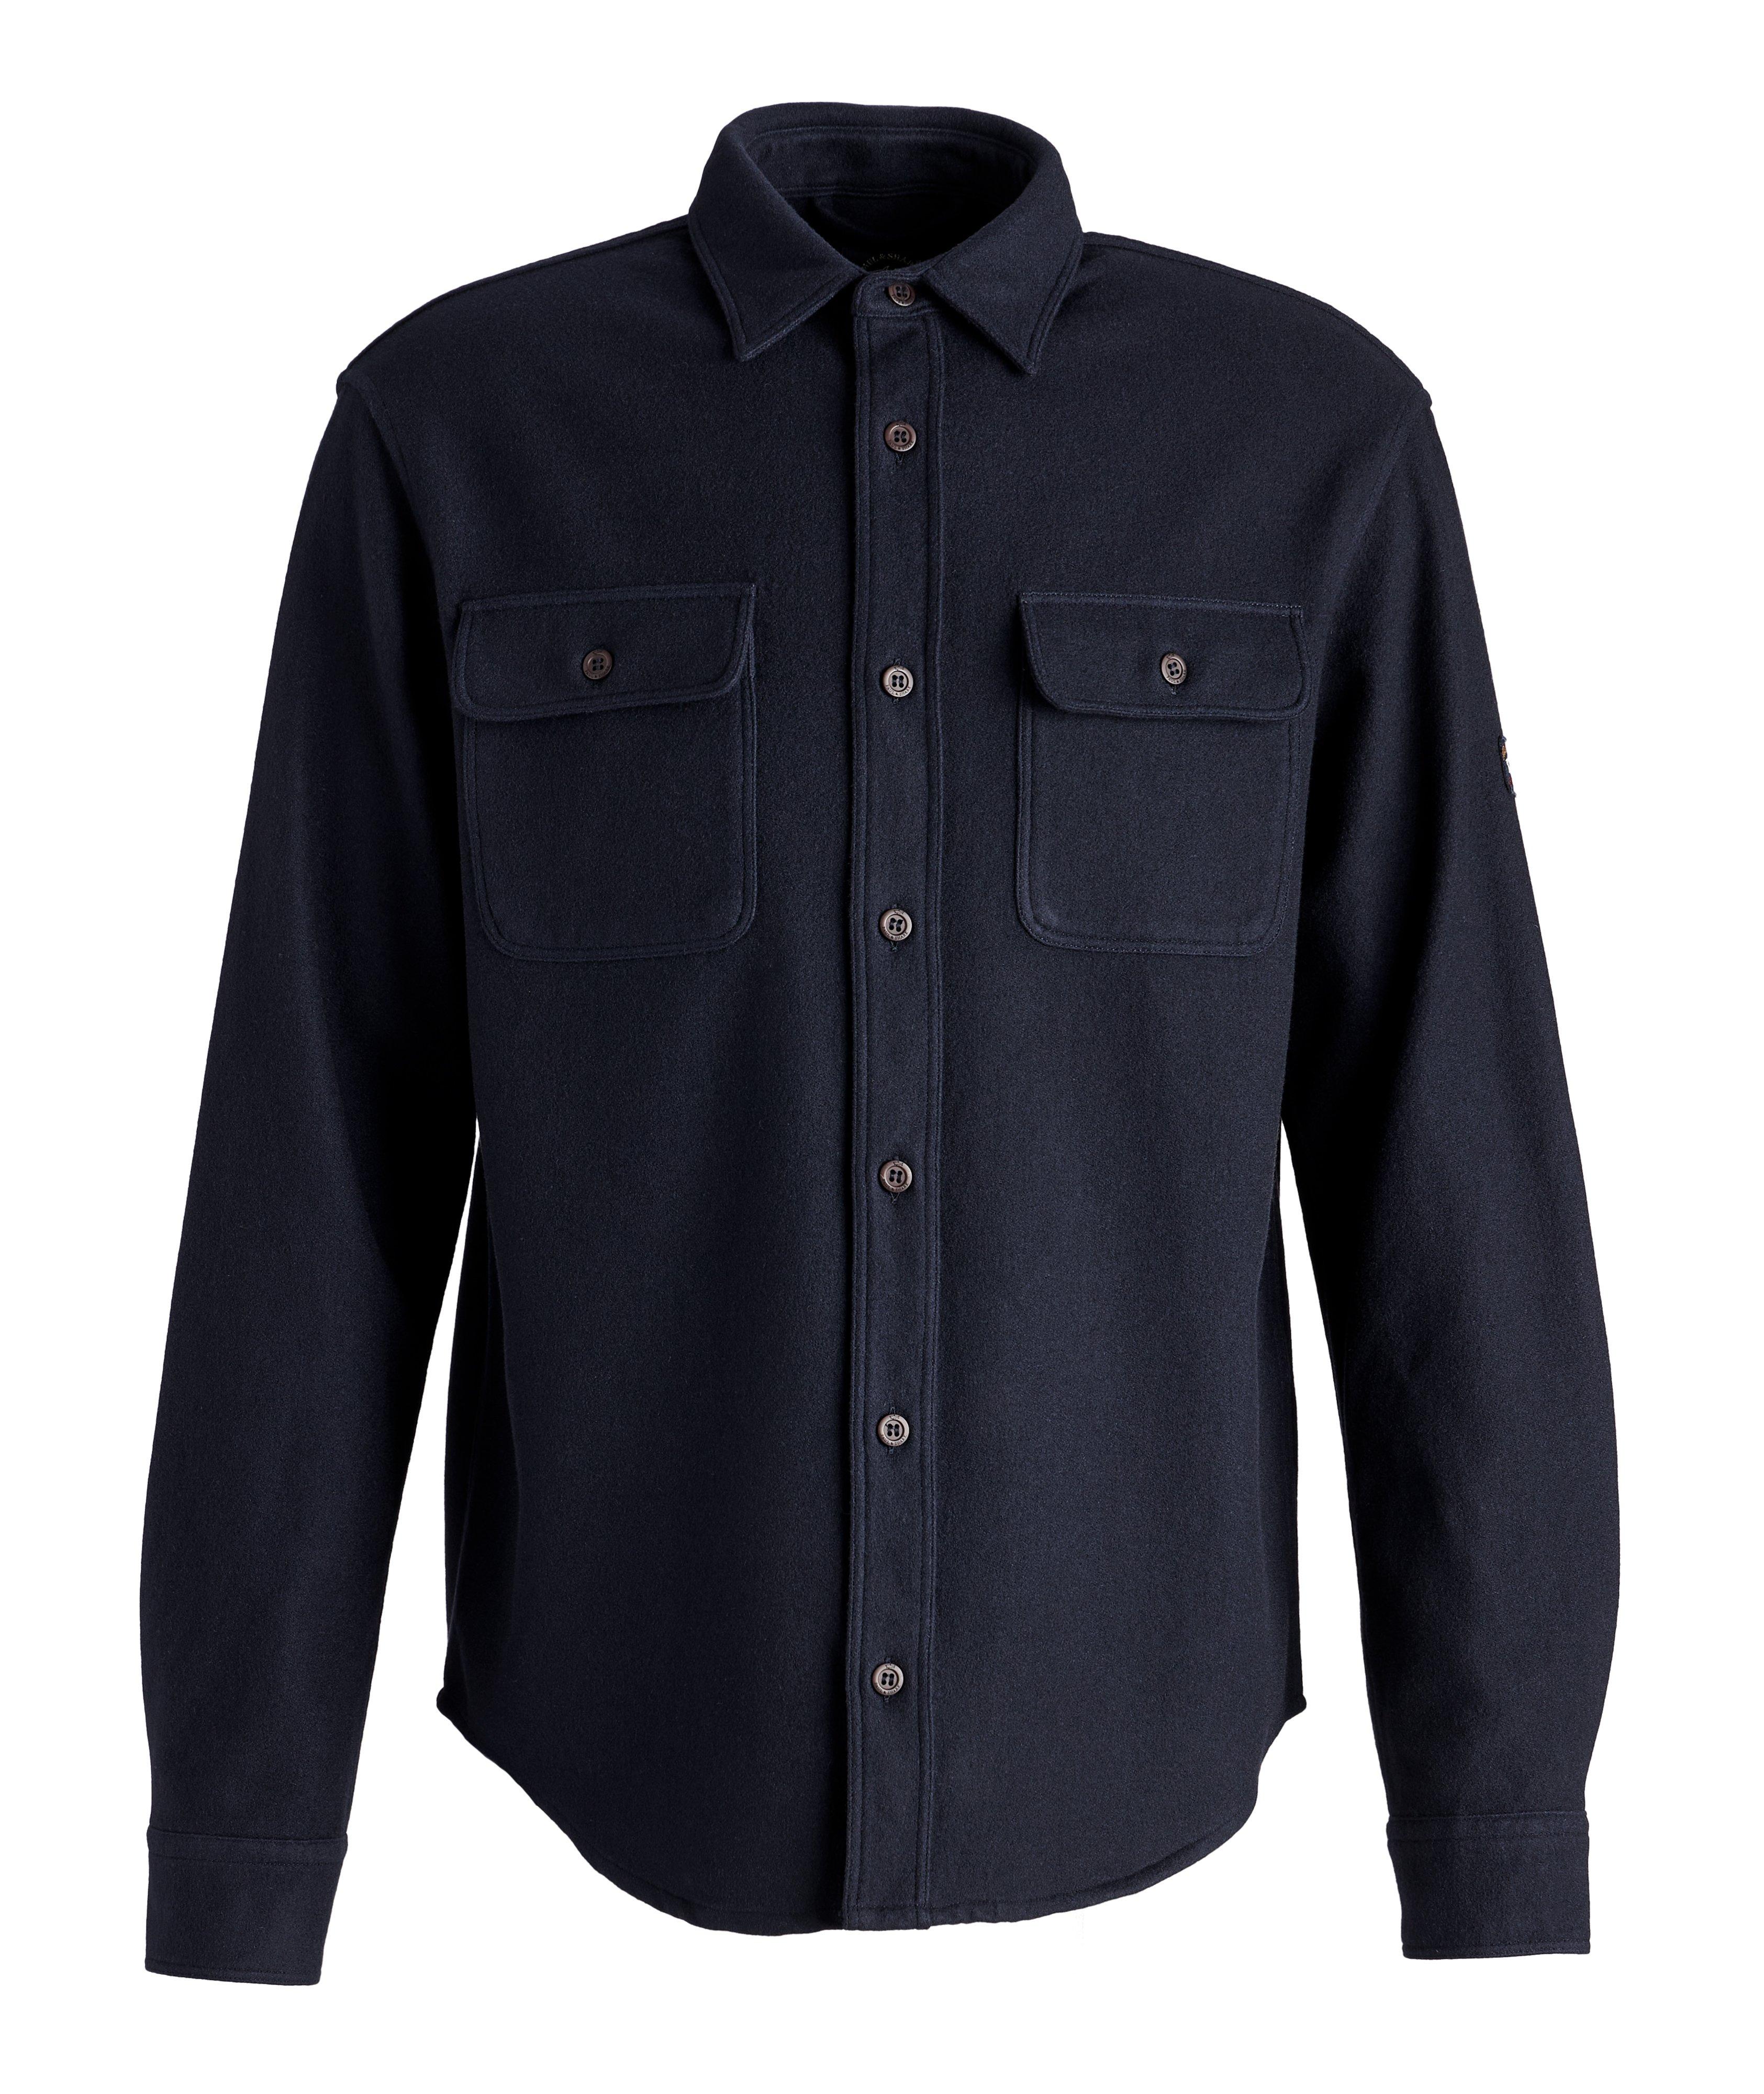 Wool-Blend Double Faced Overshirt image 0